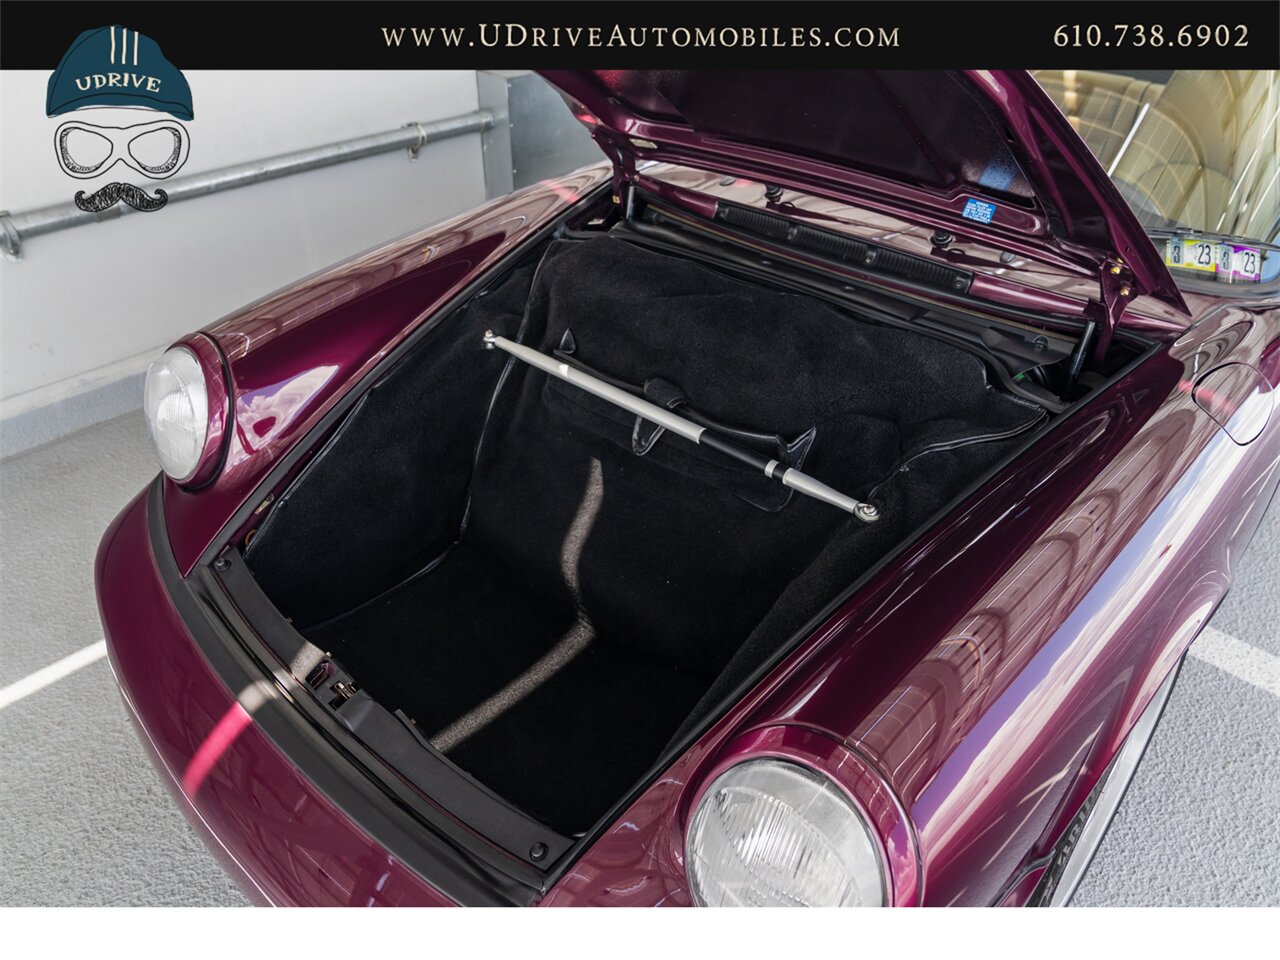 1991 Porsche 911 Carrera 2  5 Speed $57k in Service and UpGrades Since 2020 - Photo 56 - West Chester, PA 19382